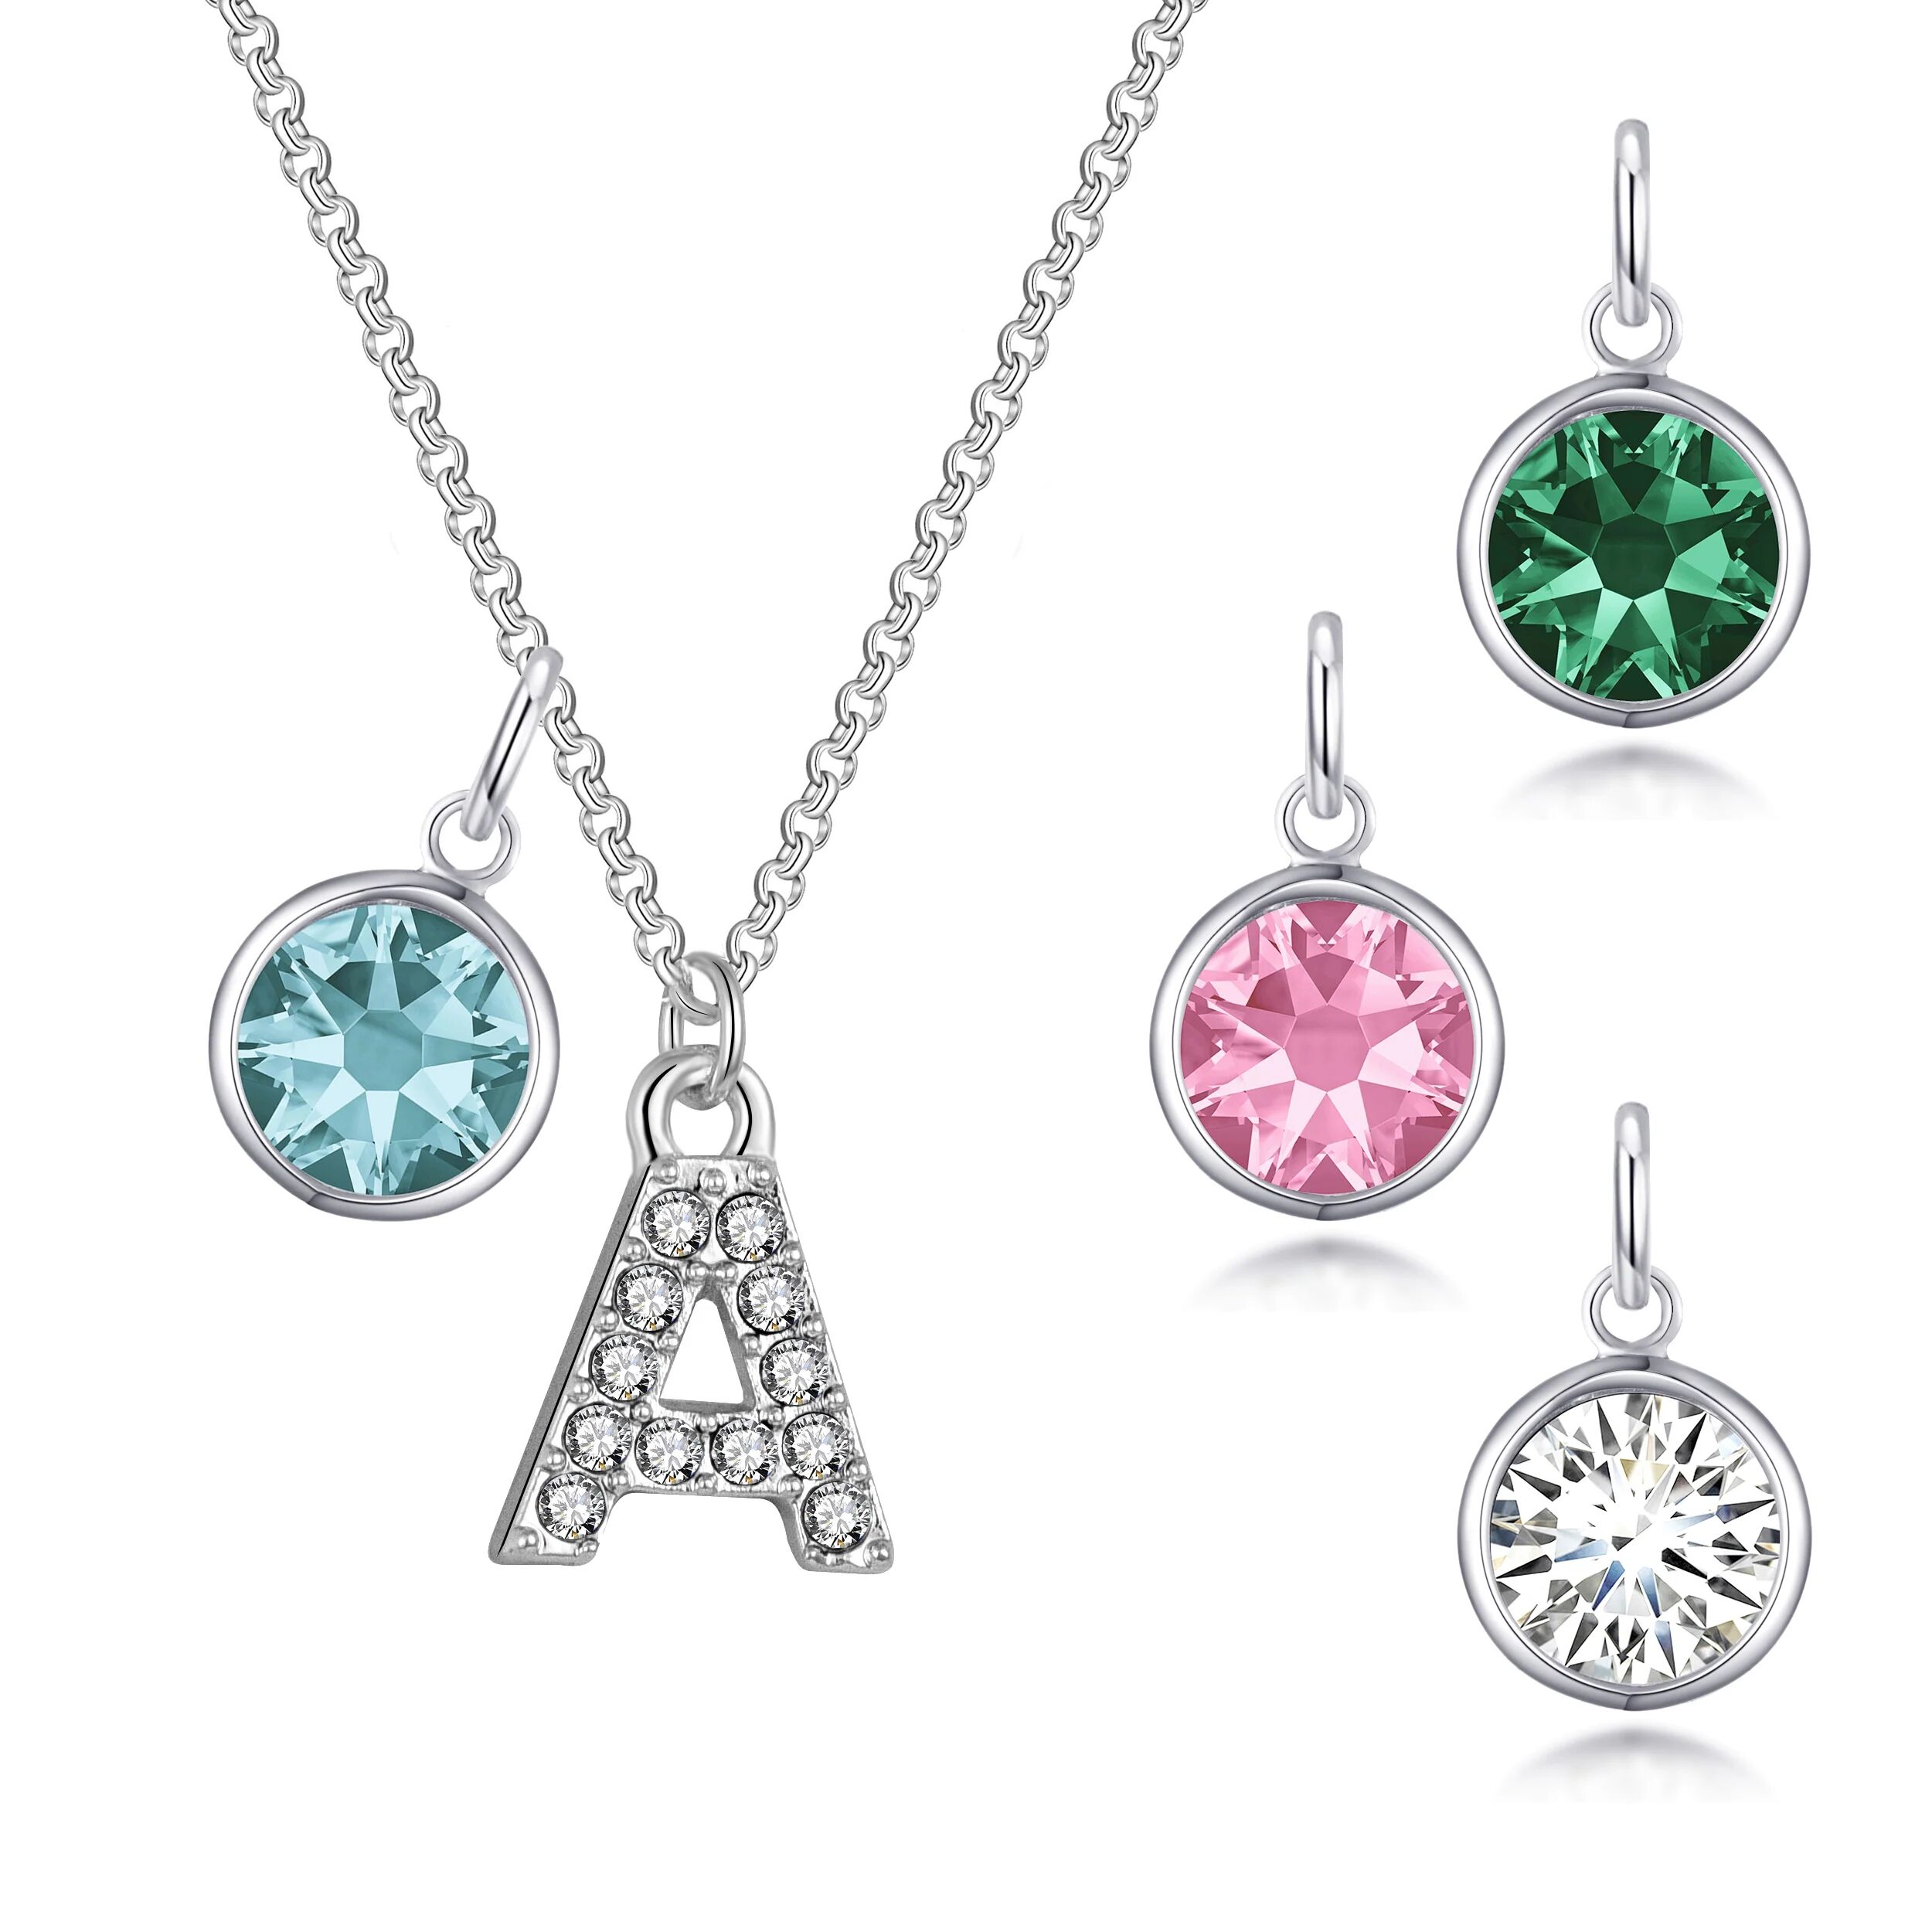 Philip Jones Jewellery Pave Initial A Necklace with Birthstone Charm Created with Zircondia® Crystals